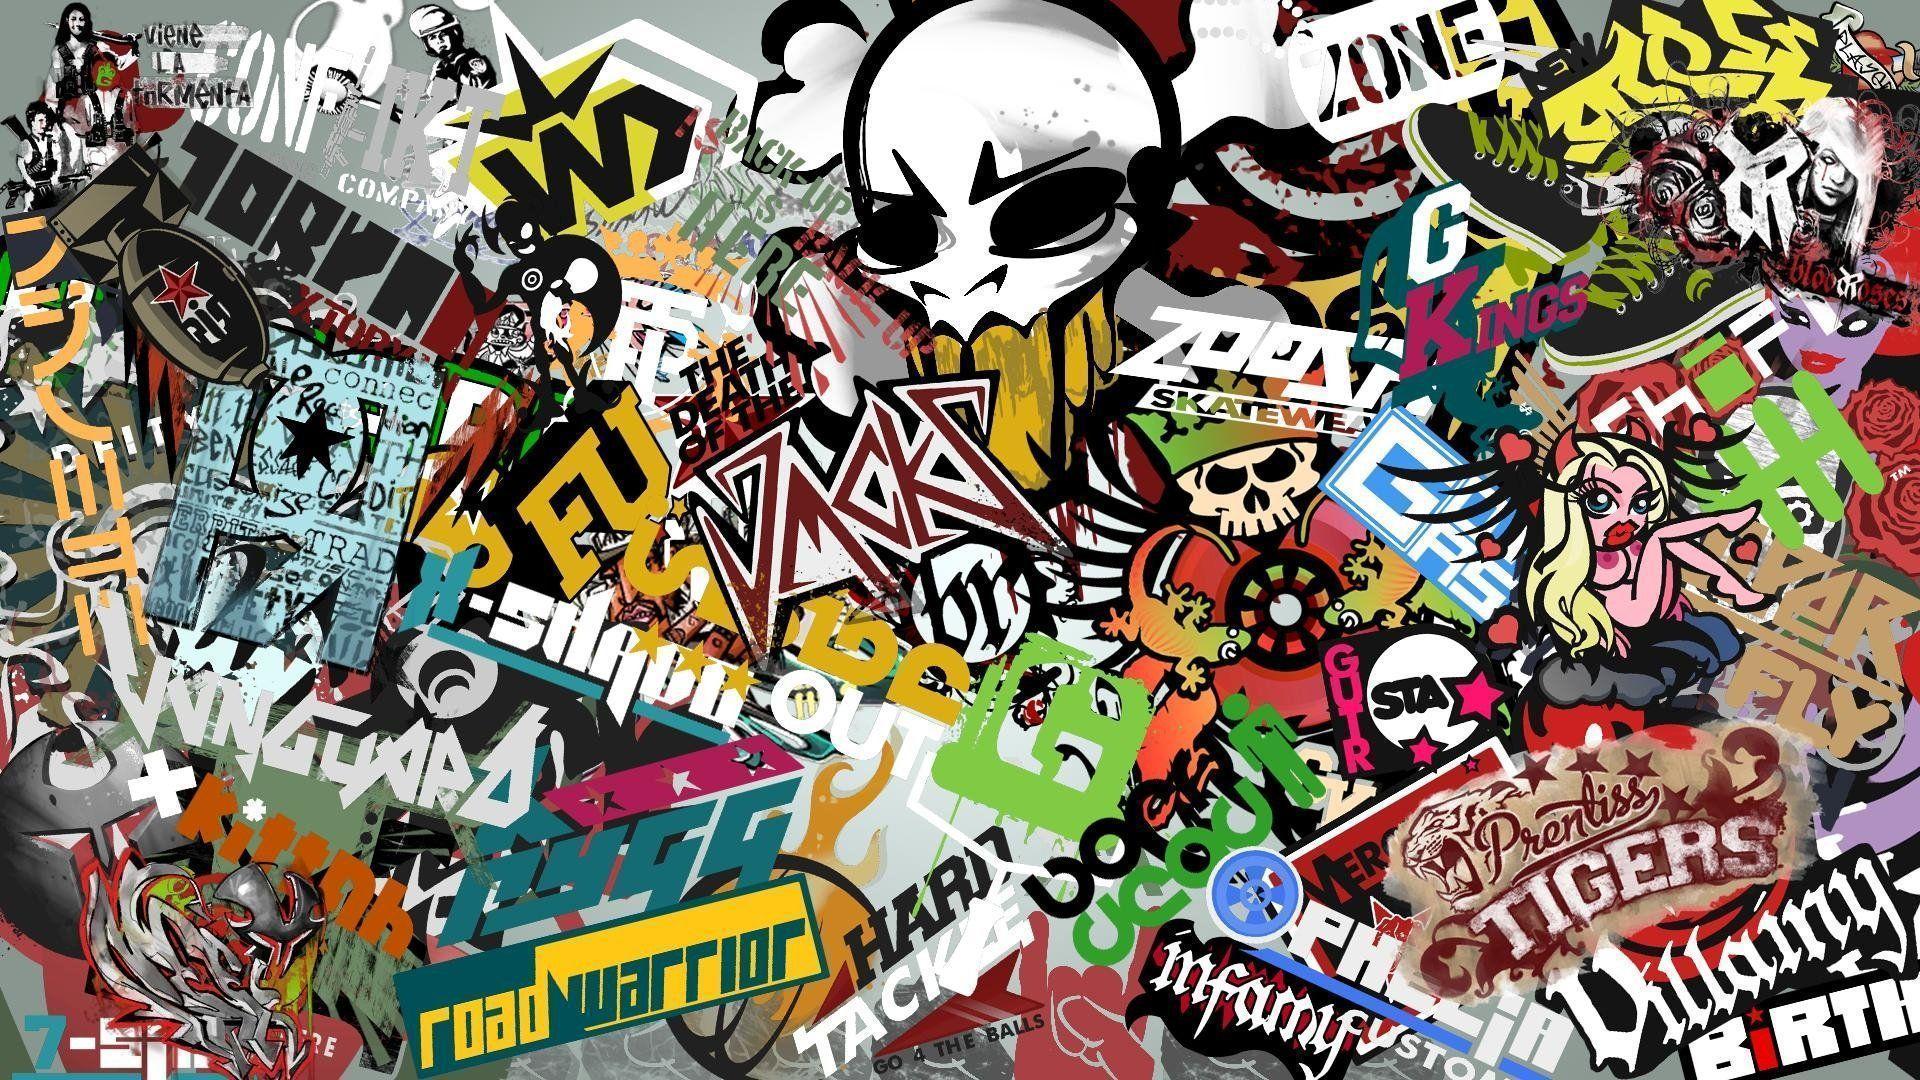 Sticker Bomb HD Wallpaper and Background Image